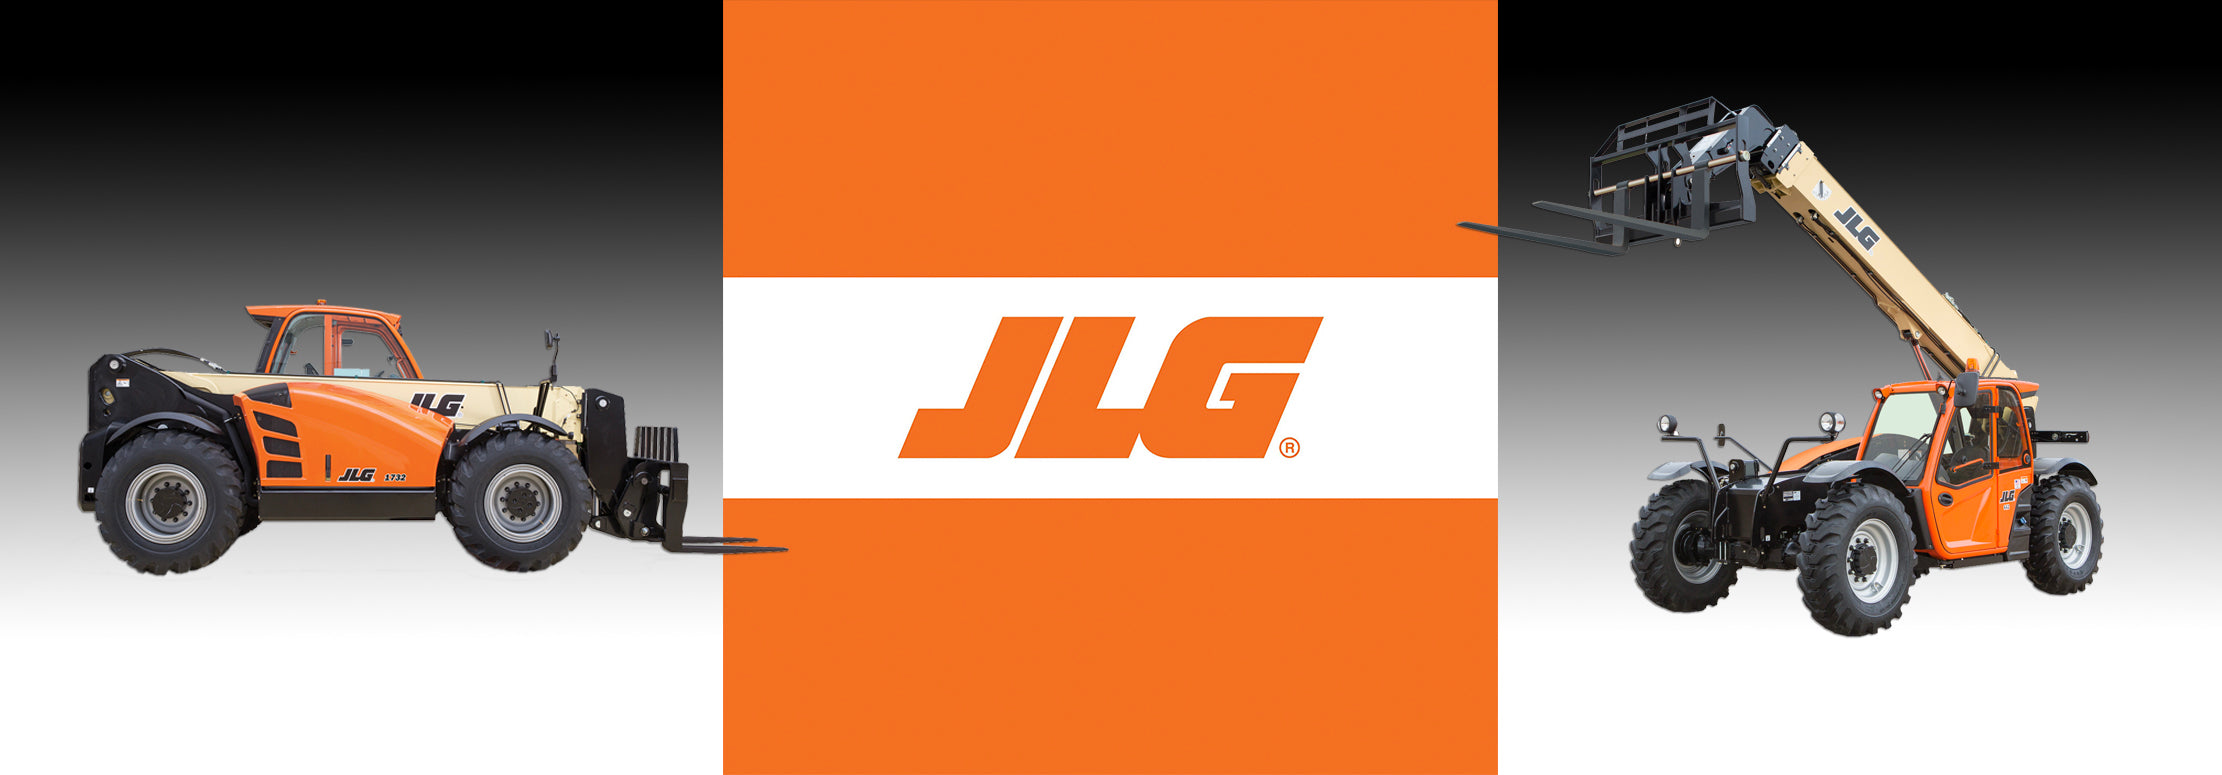 JLG Equipment tire covers tire socks tire boots drip protection diapers